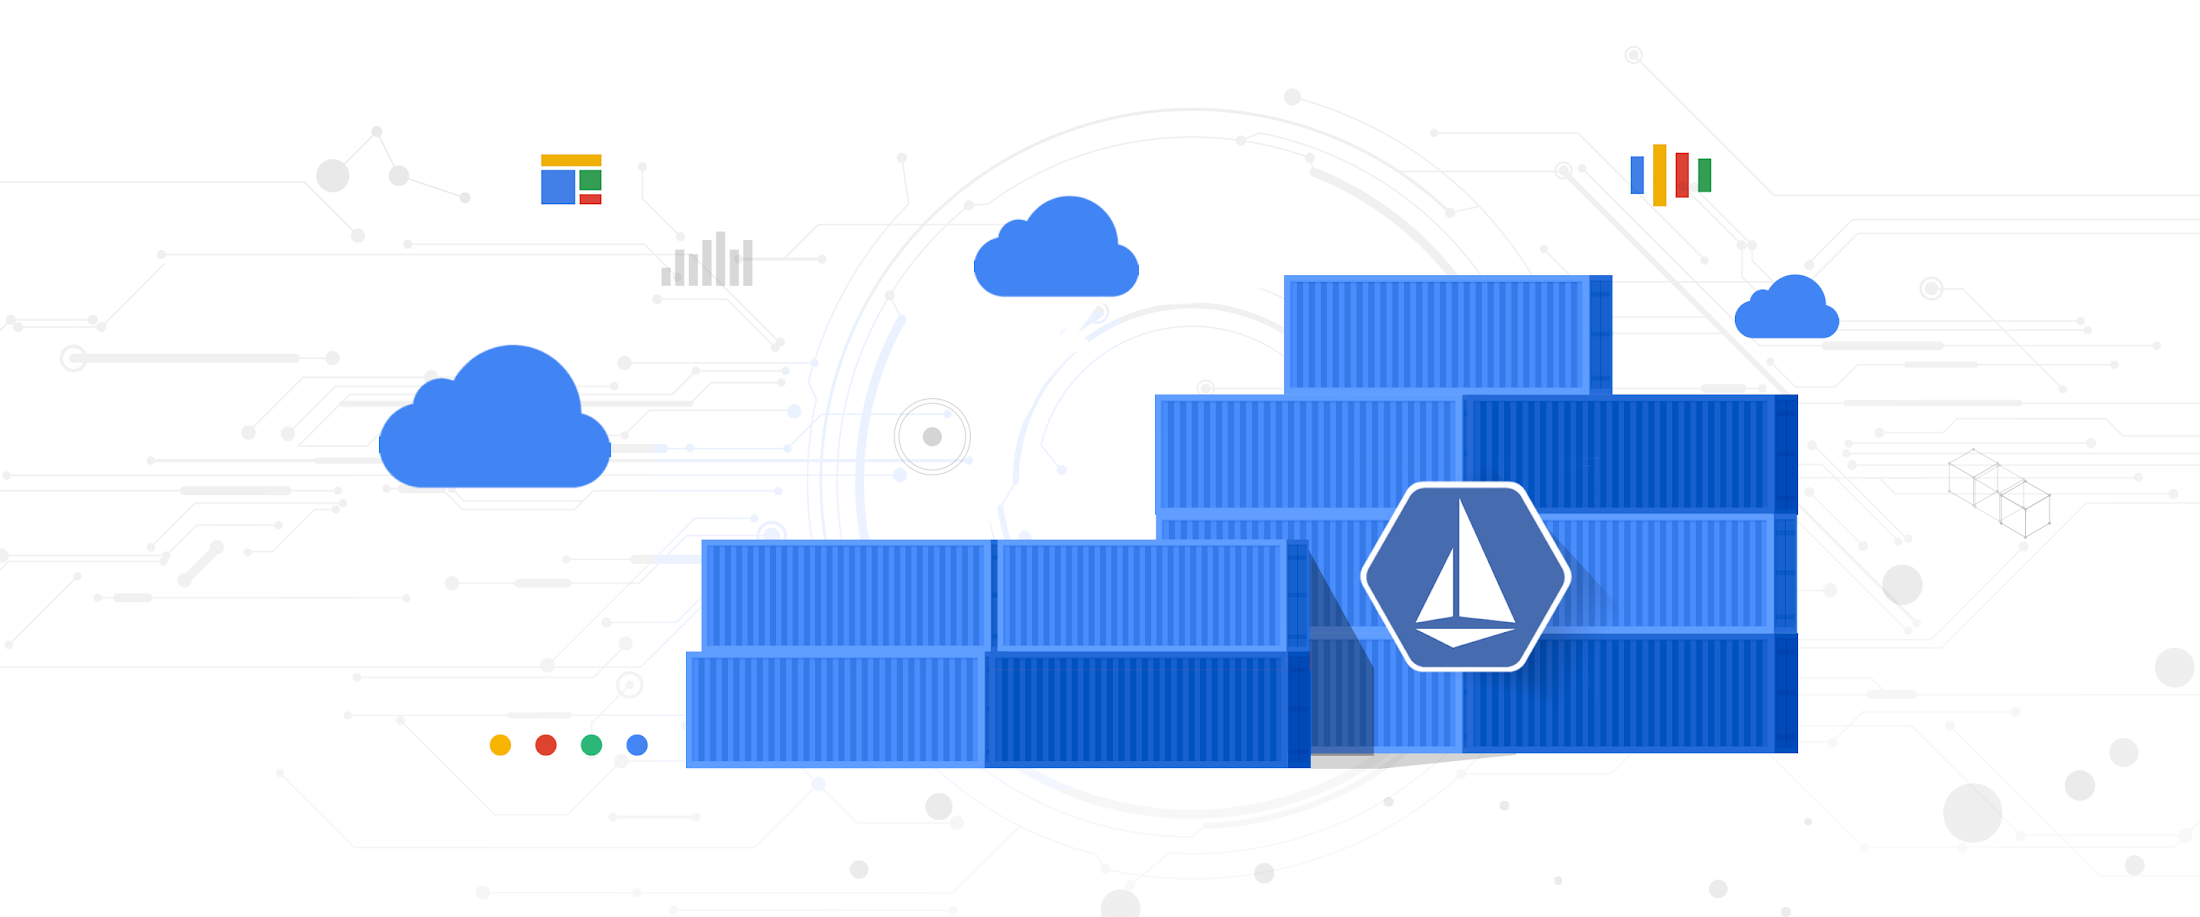 Illustration of service mesh with Istio logo